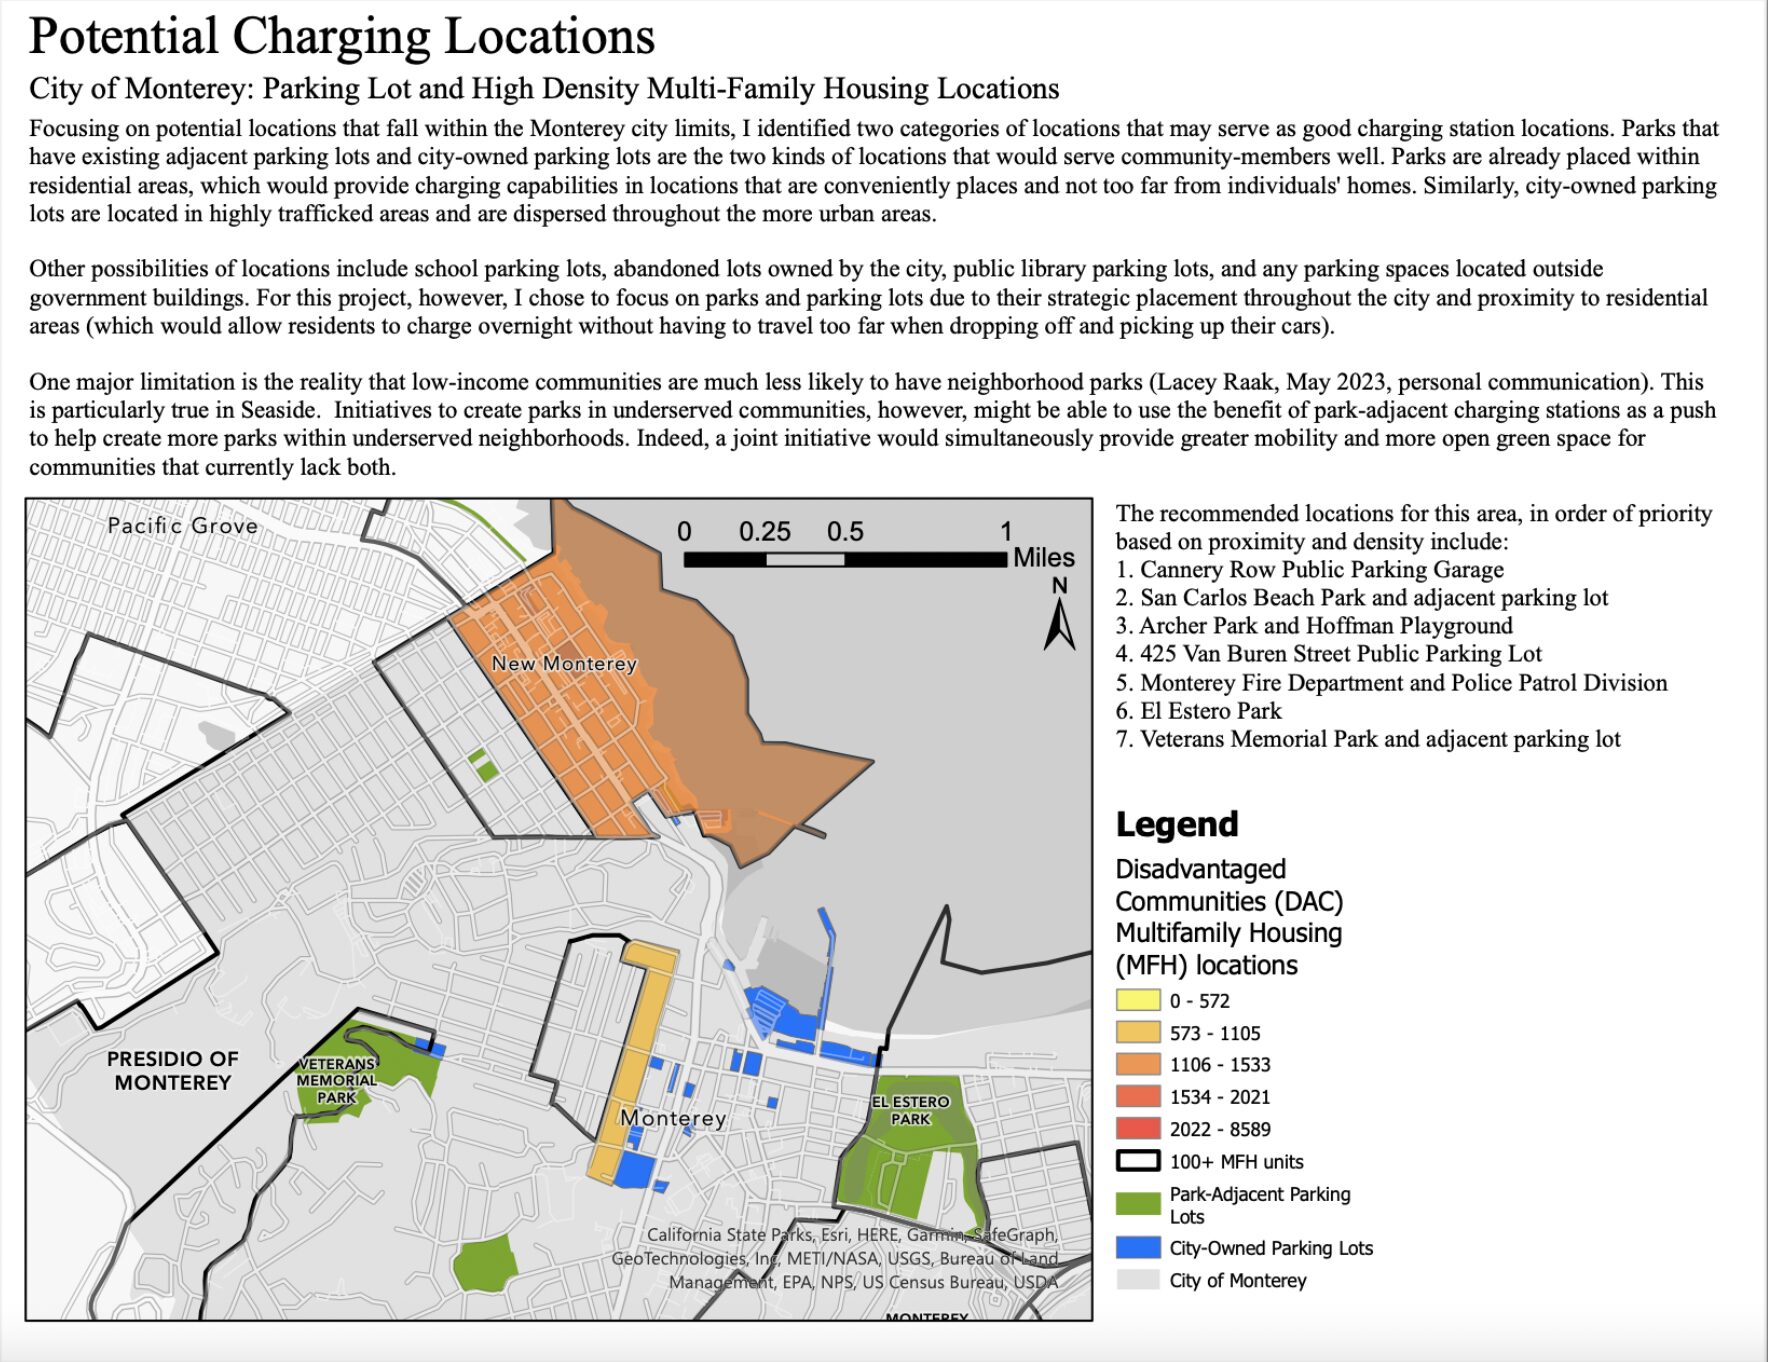 A map showing potential EV charging locations in Monterey, California.